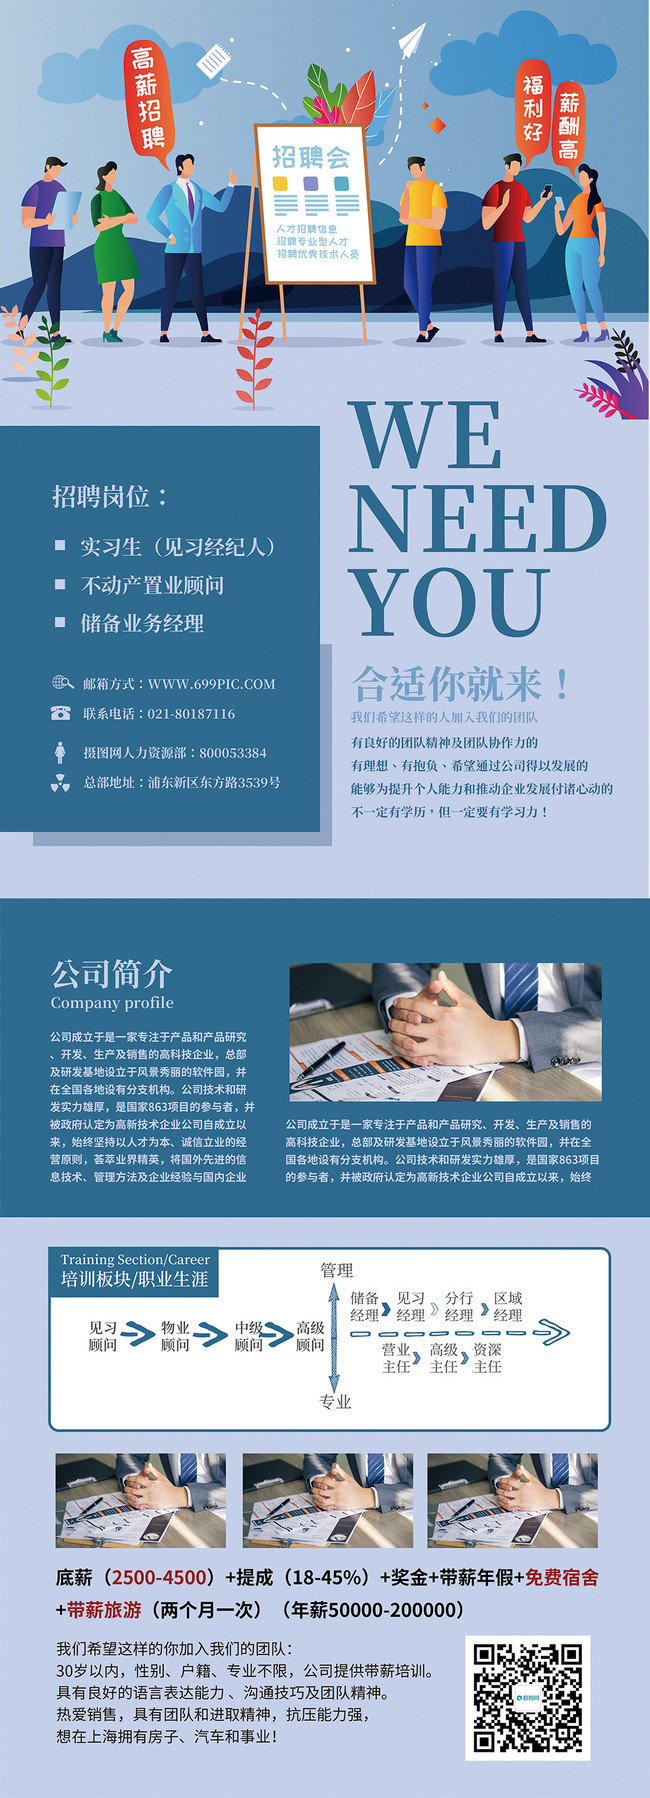 Business recruitment flyer template image_picture free download With Recruitment Flyer Template